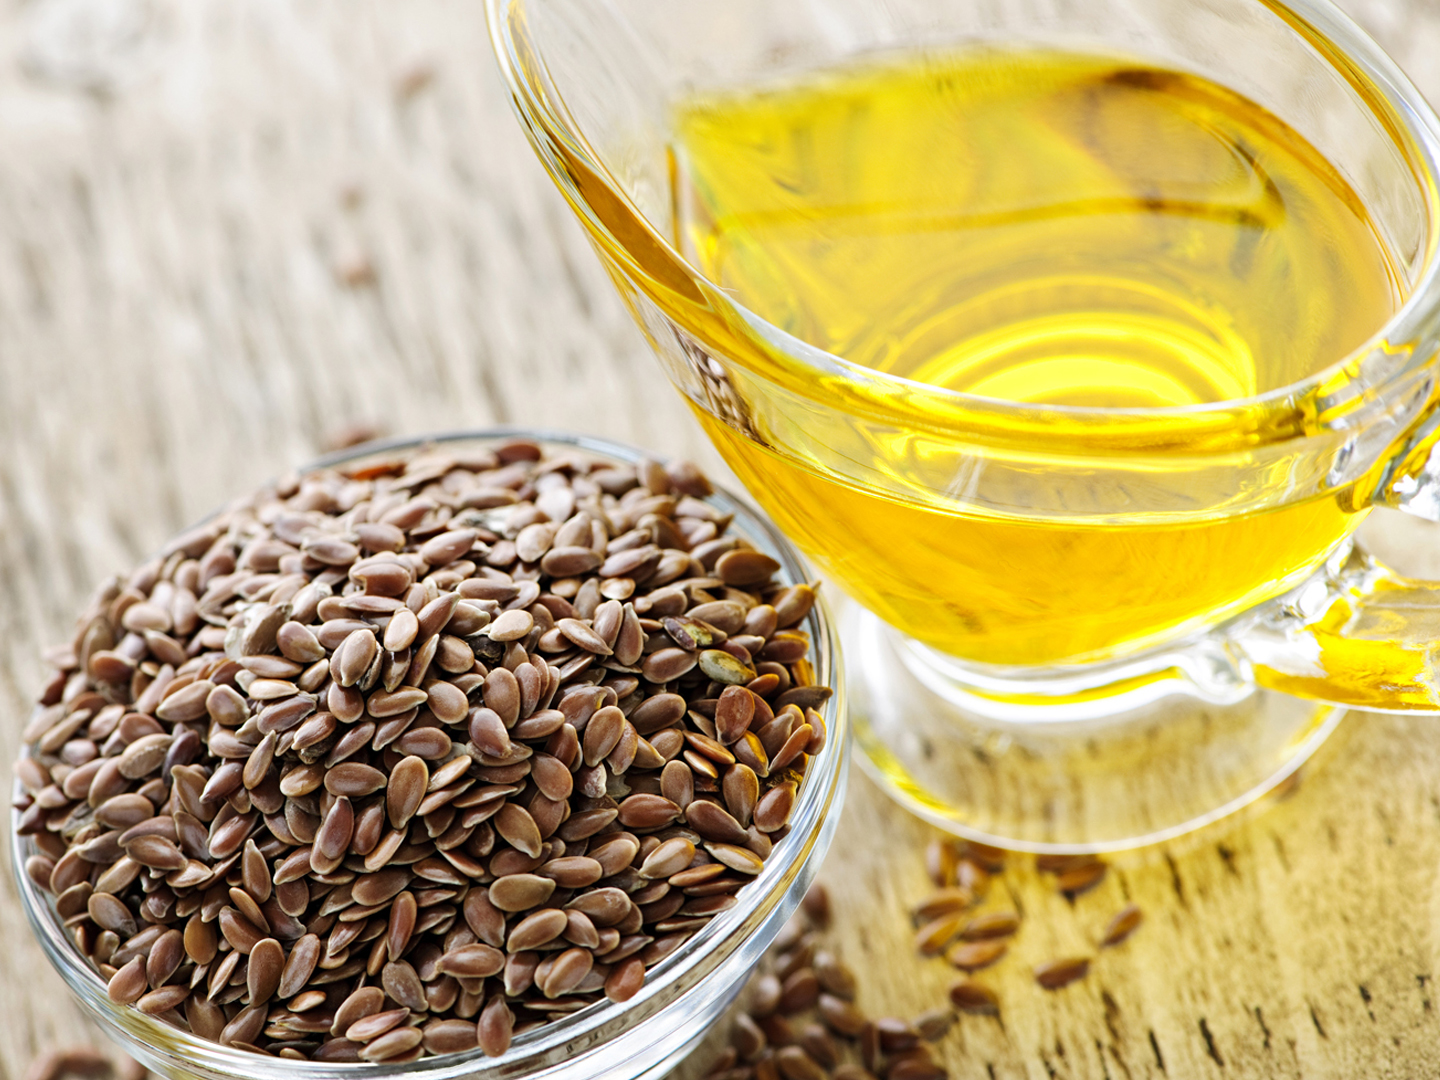 A Flaxseed Oil Risk For Men?